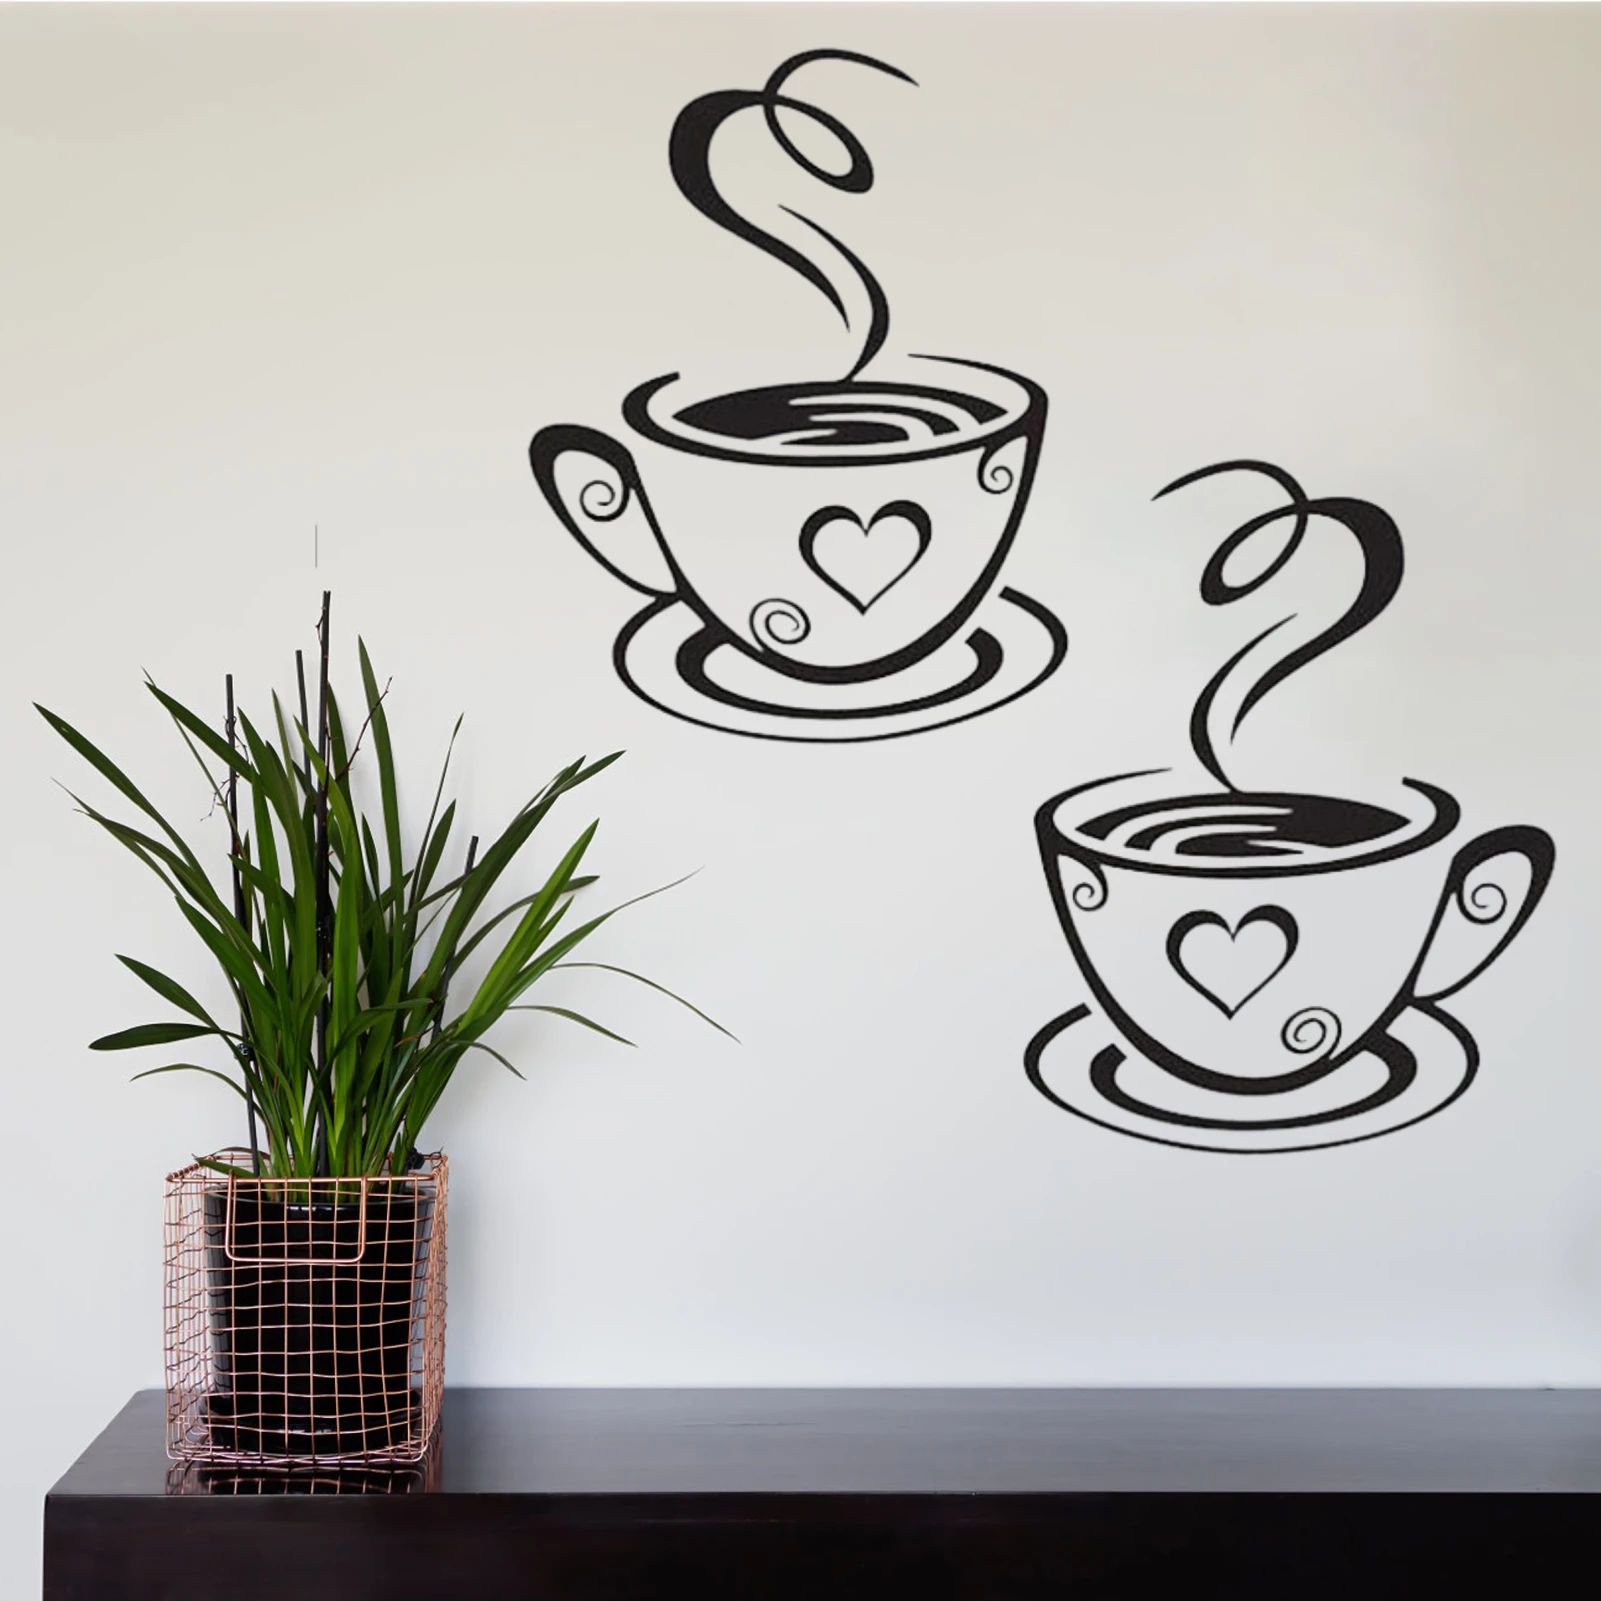 2PCS Removable Diy Mug Decal Wallpaper Coffee Cup Wall Stickers Coffee Cup  Wall Decorations Coffee Shop Kitchen Decals For Wall| | - AliExpress